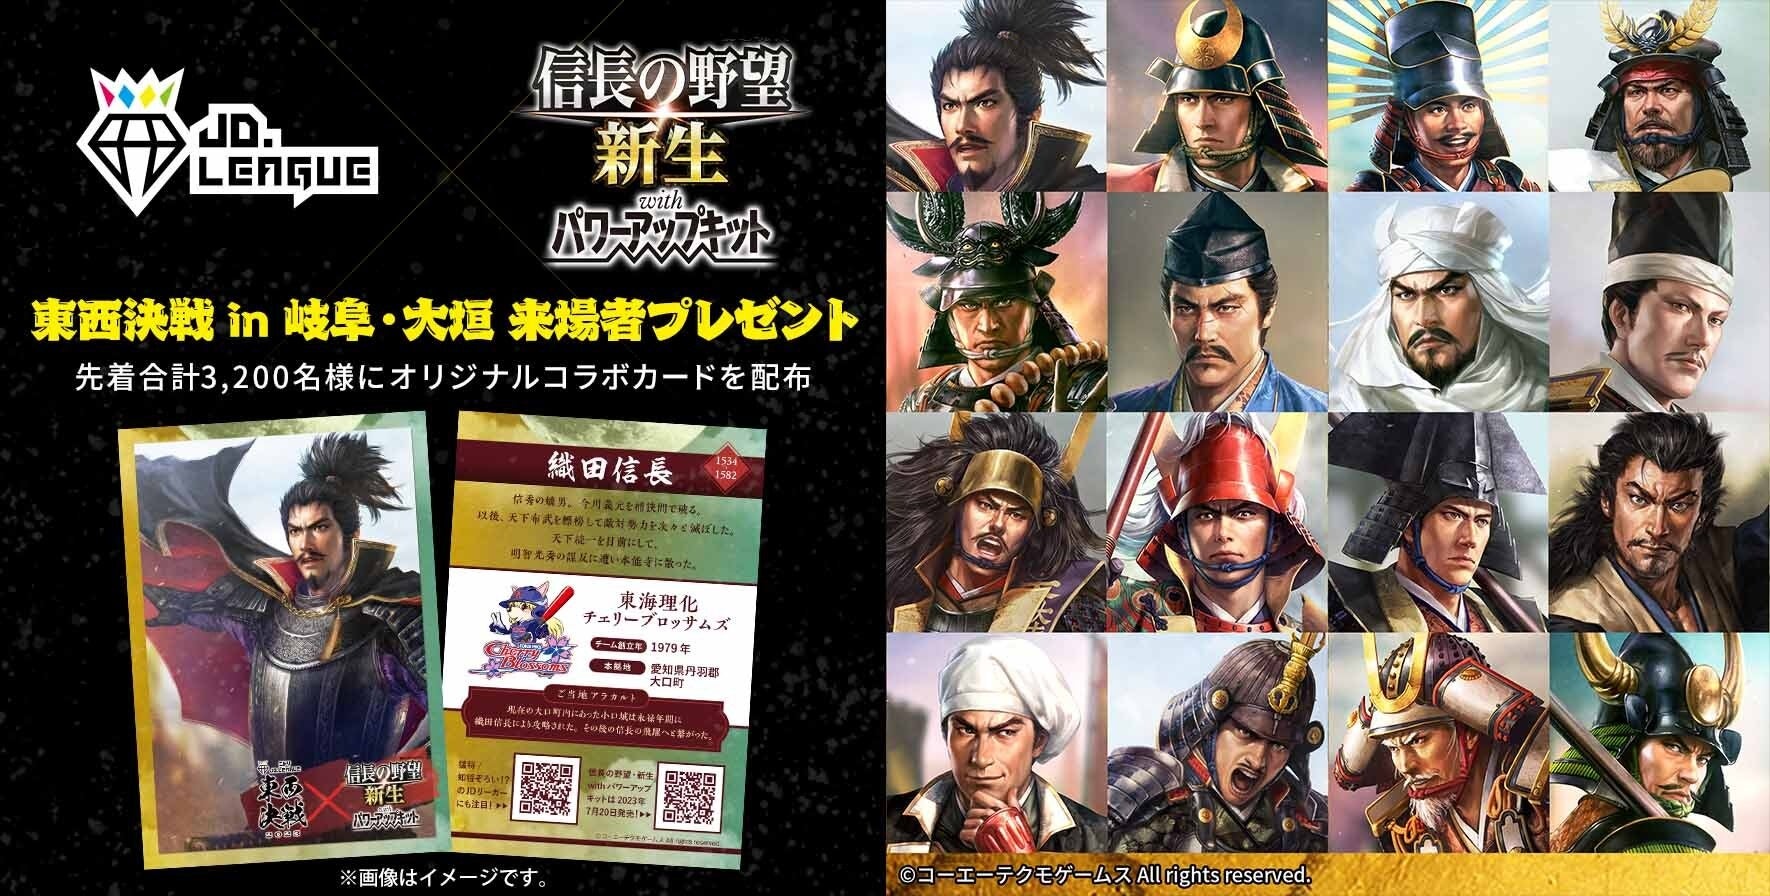 JD.LEAGUE × 『信長の野望･新生with パワーアップキット』コラボ企画 東西決戦in岐阜・大垣 来場者プレゼント実施！